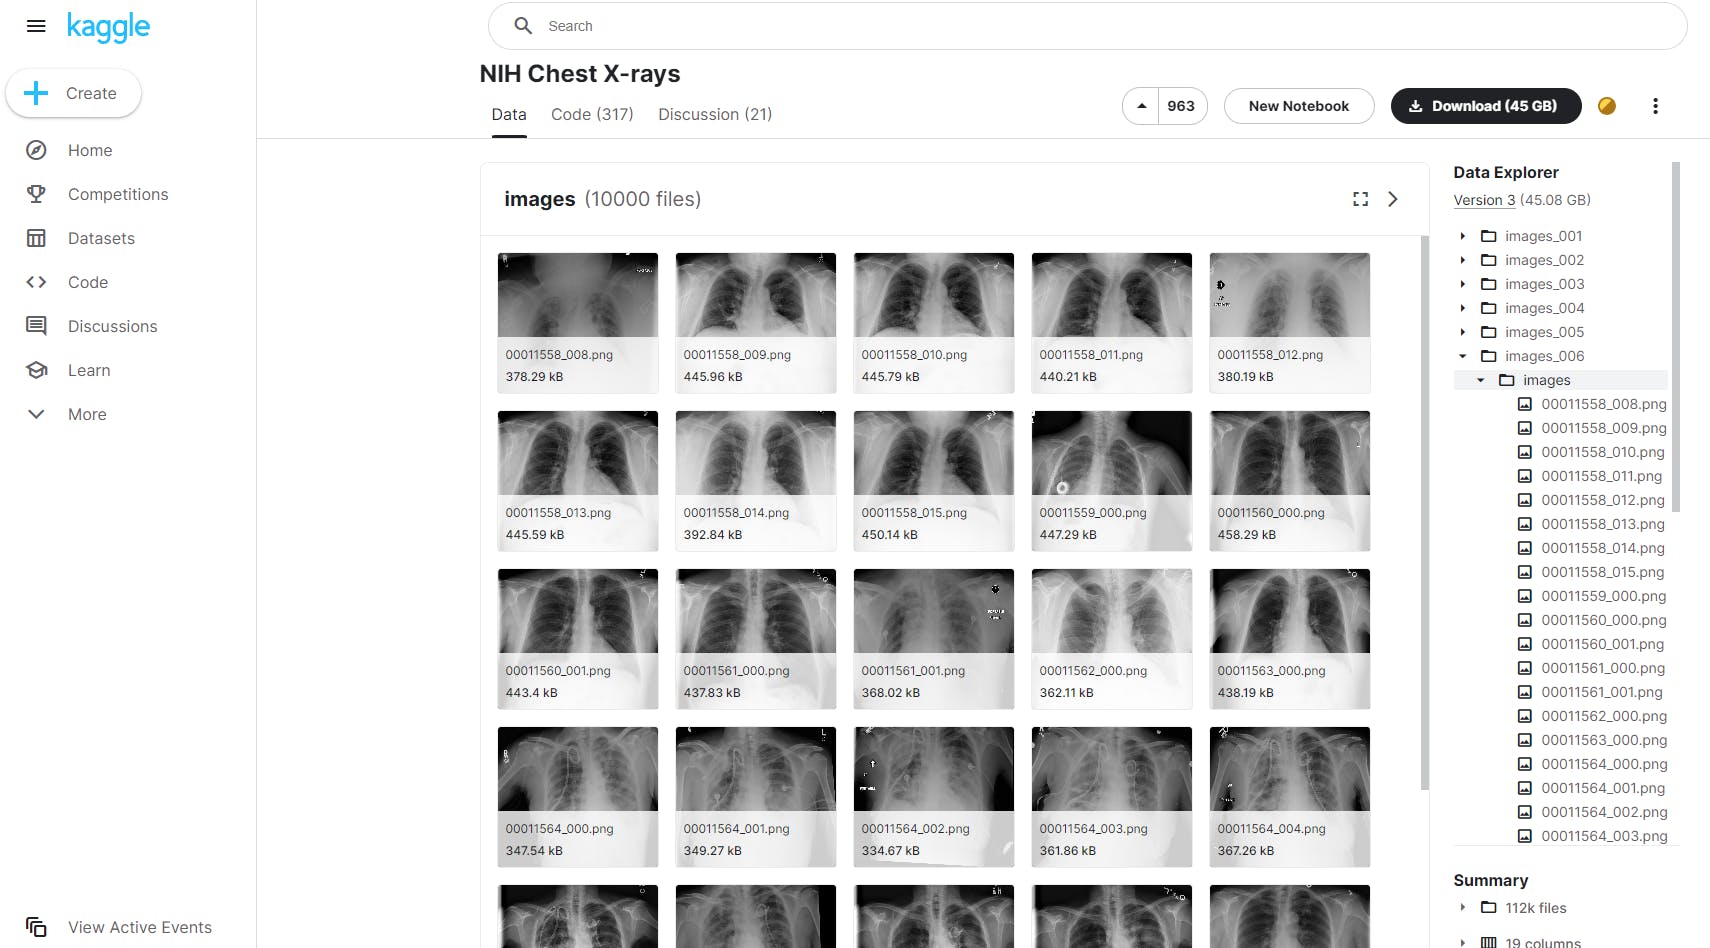 Examples from the NIH chest X-rays dataset.